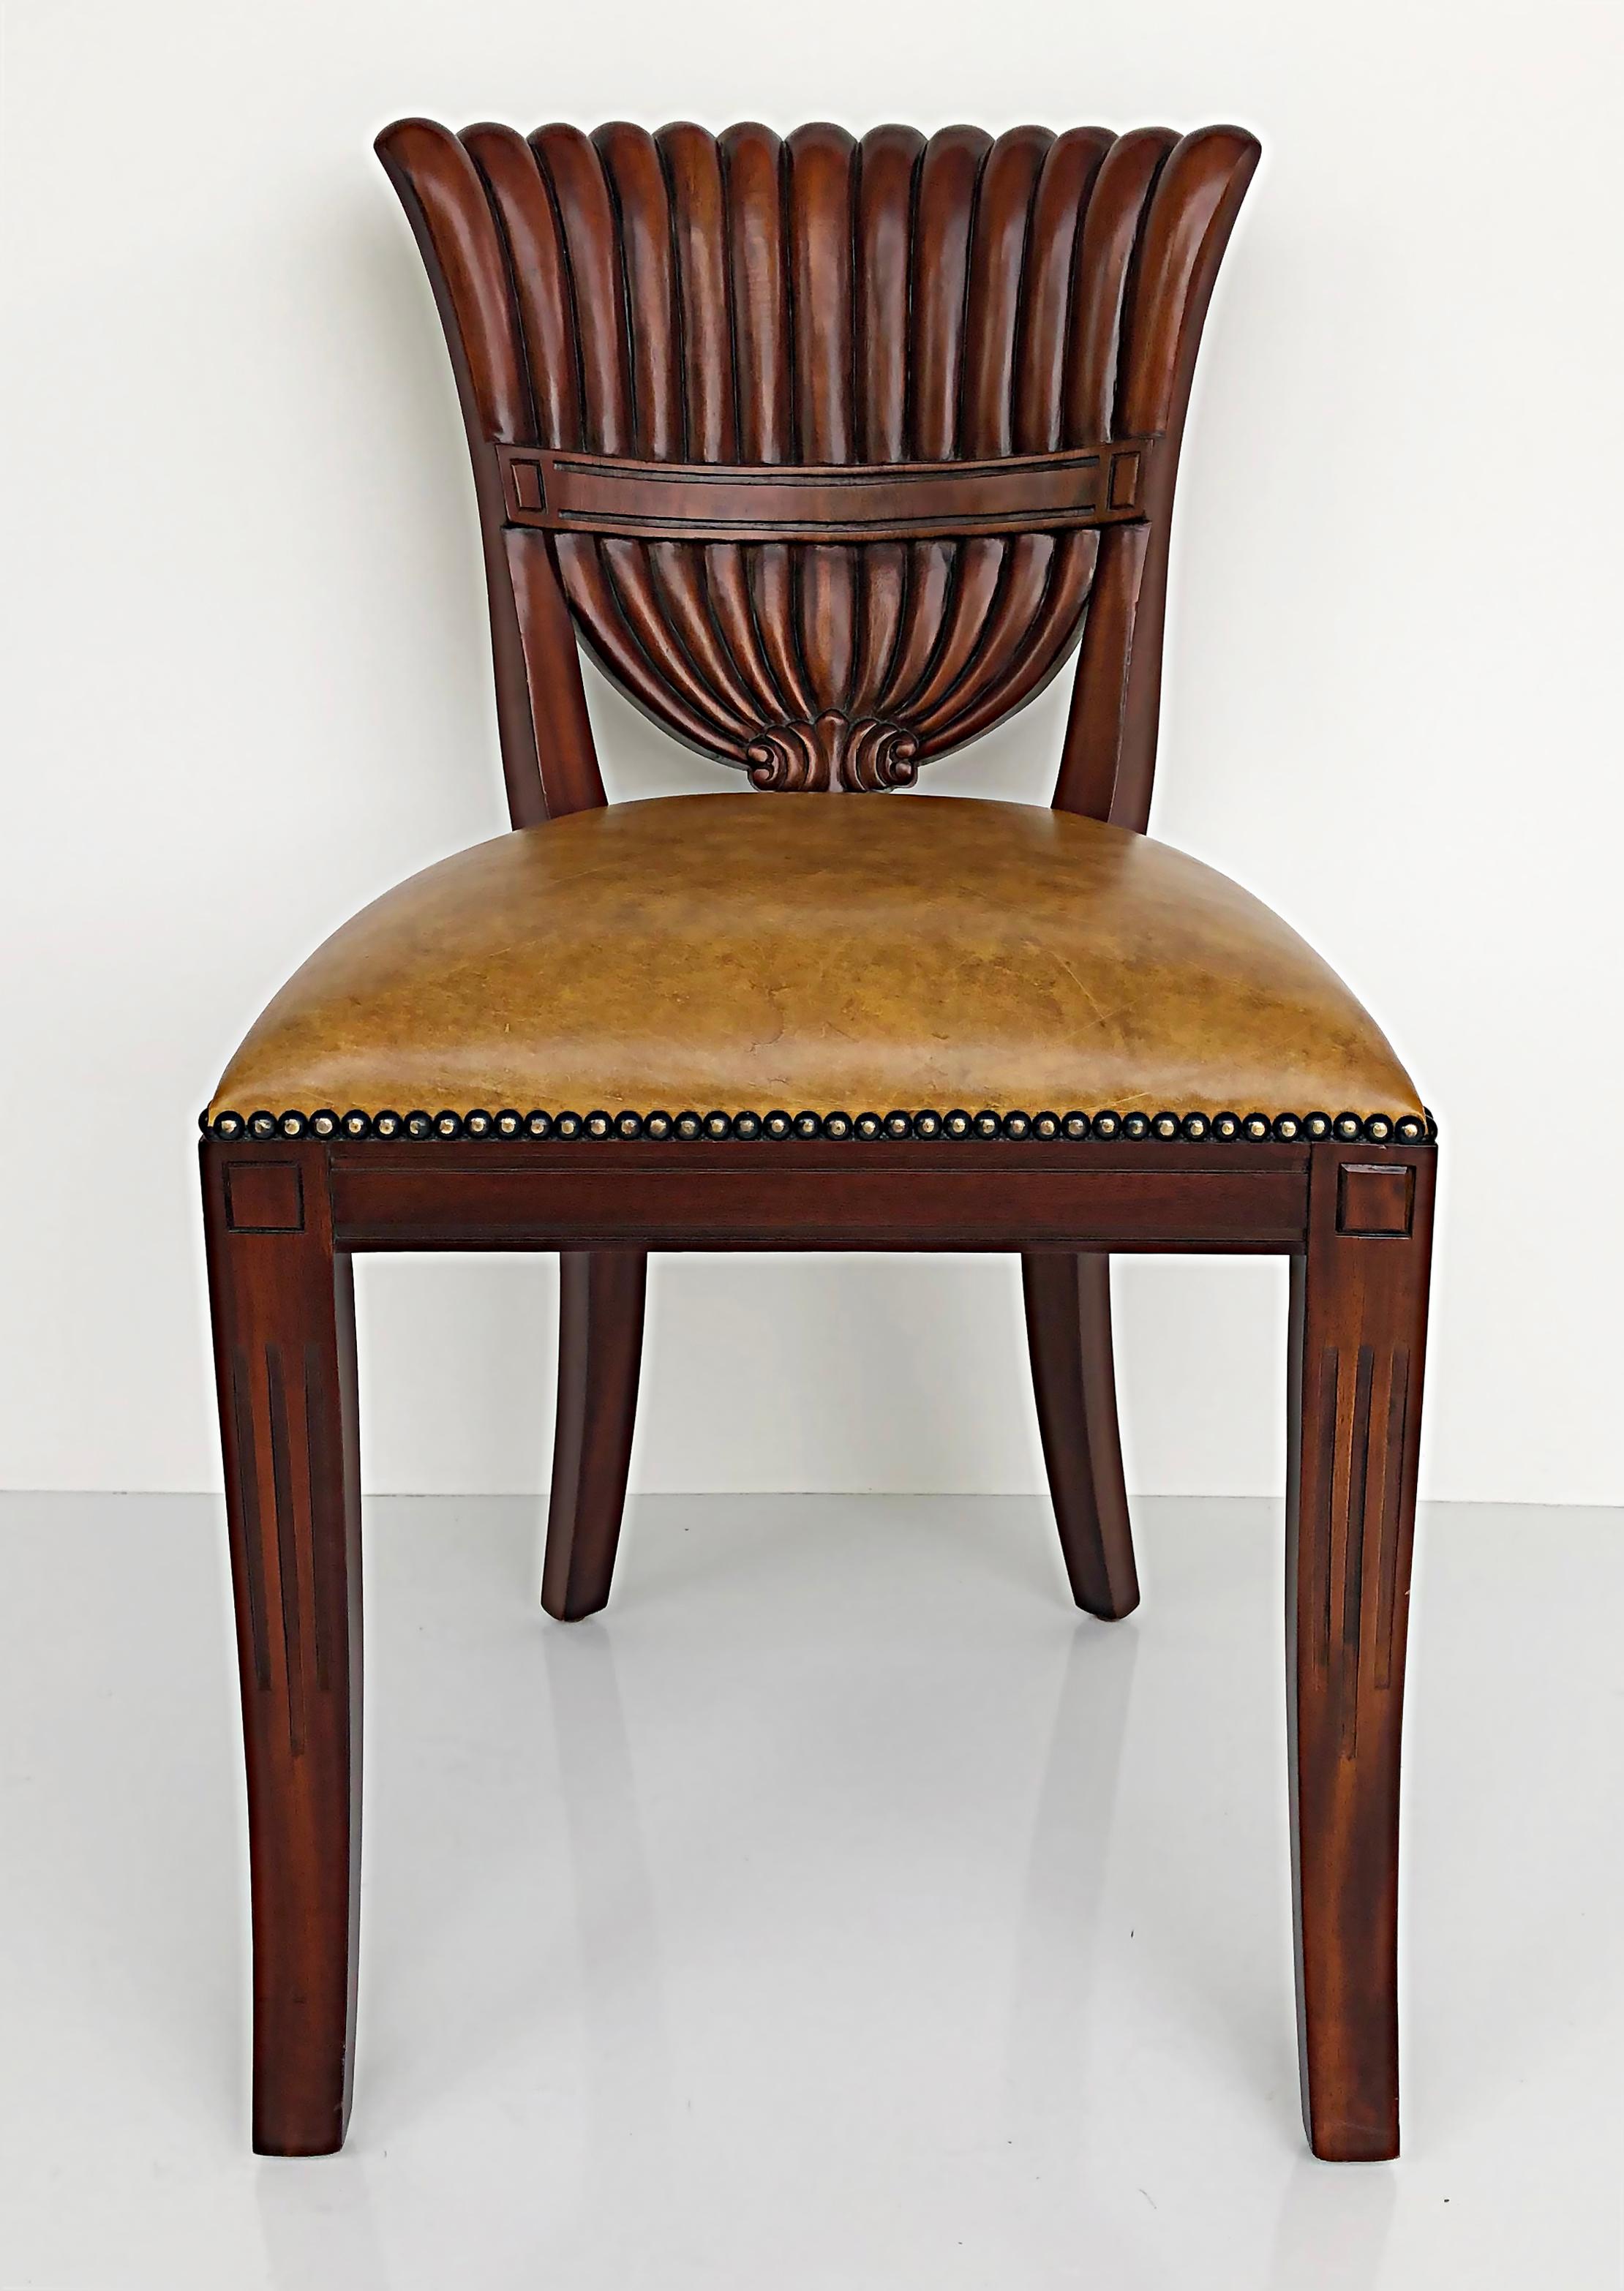 Maitland Smith carved wood side chairs, nailhead detail trim, pair.

Offered for sale is a pair of elegantly carved wood side chairs from Maitland-Smith. The chairs are marked as shown. They are upholstered in Naugahyde and have nailhead detail